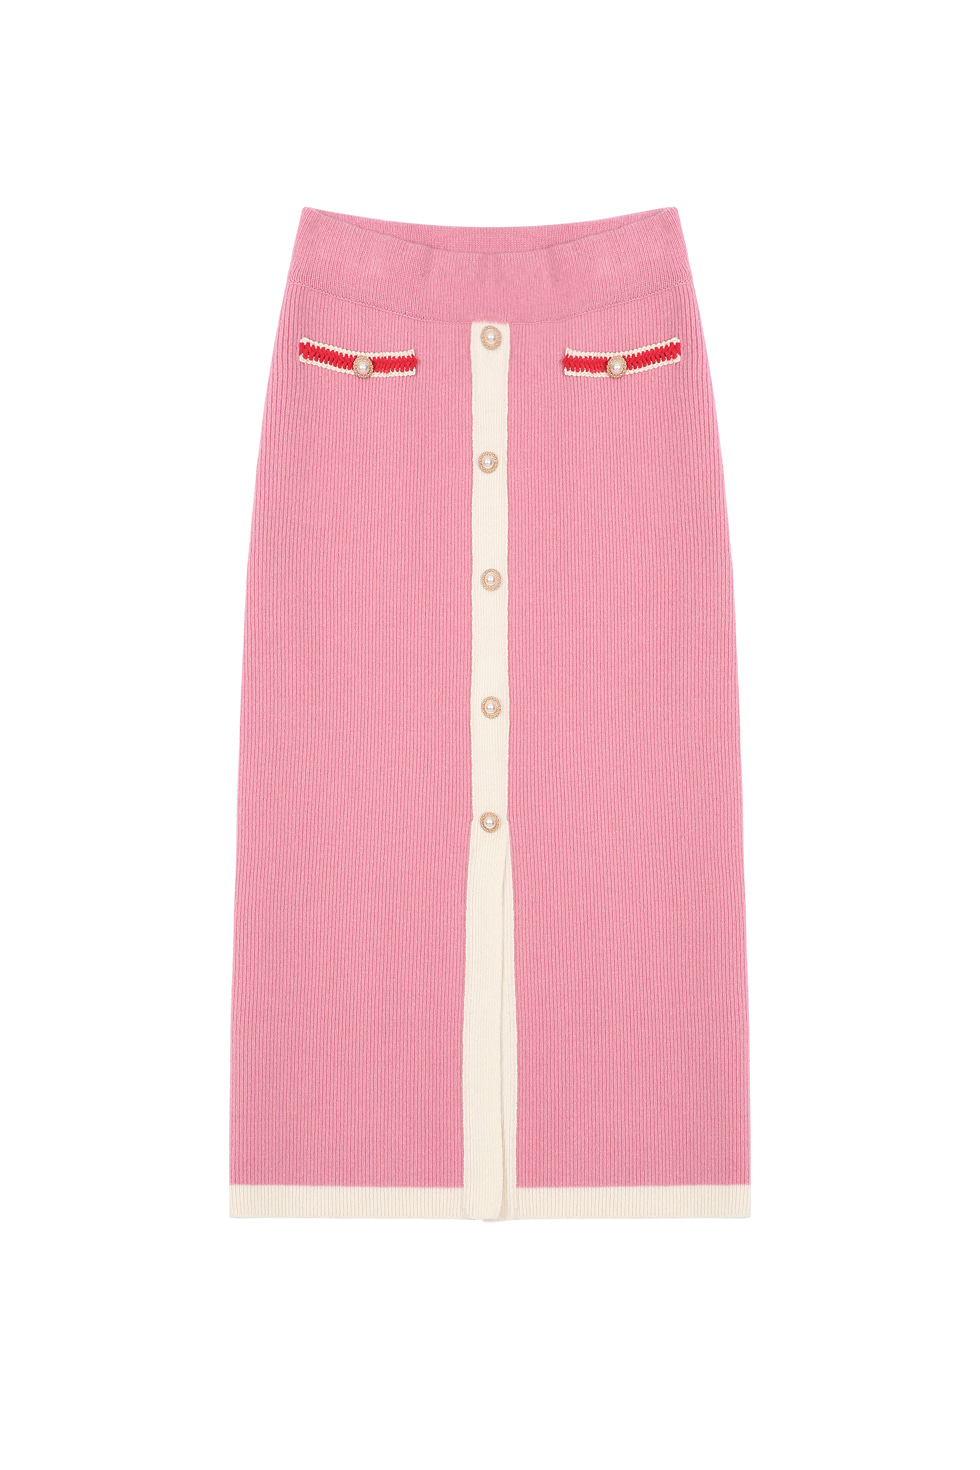 PEARL BUTTON SKIRT - PINK